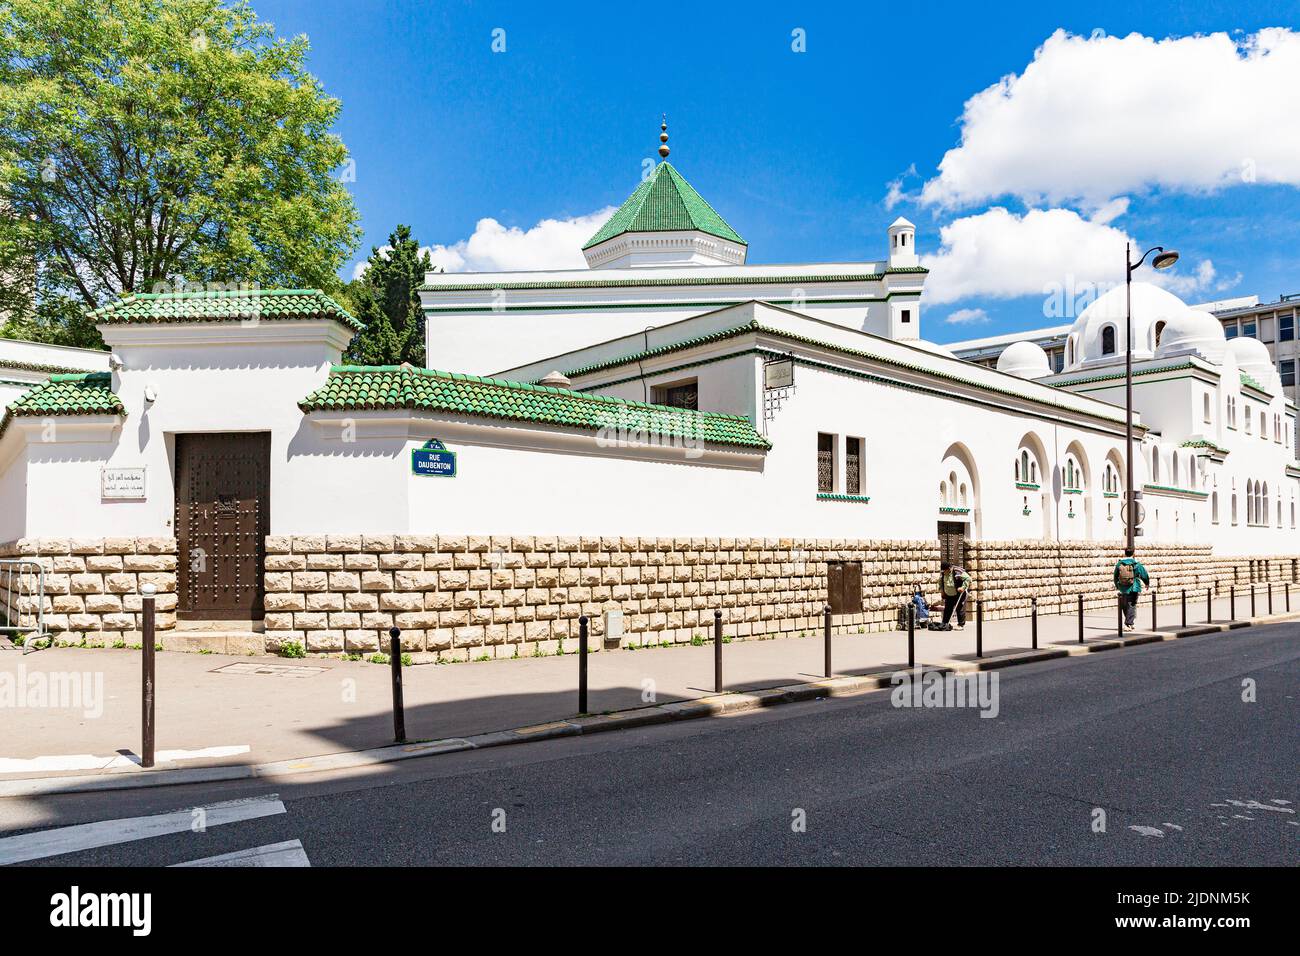 The entrance into the Restaurant The Mosque of Paris. Great Mosque of Paris Stock Photo